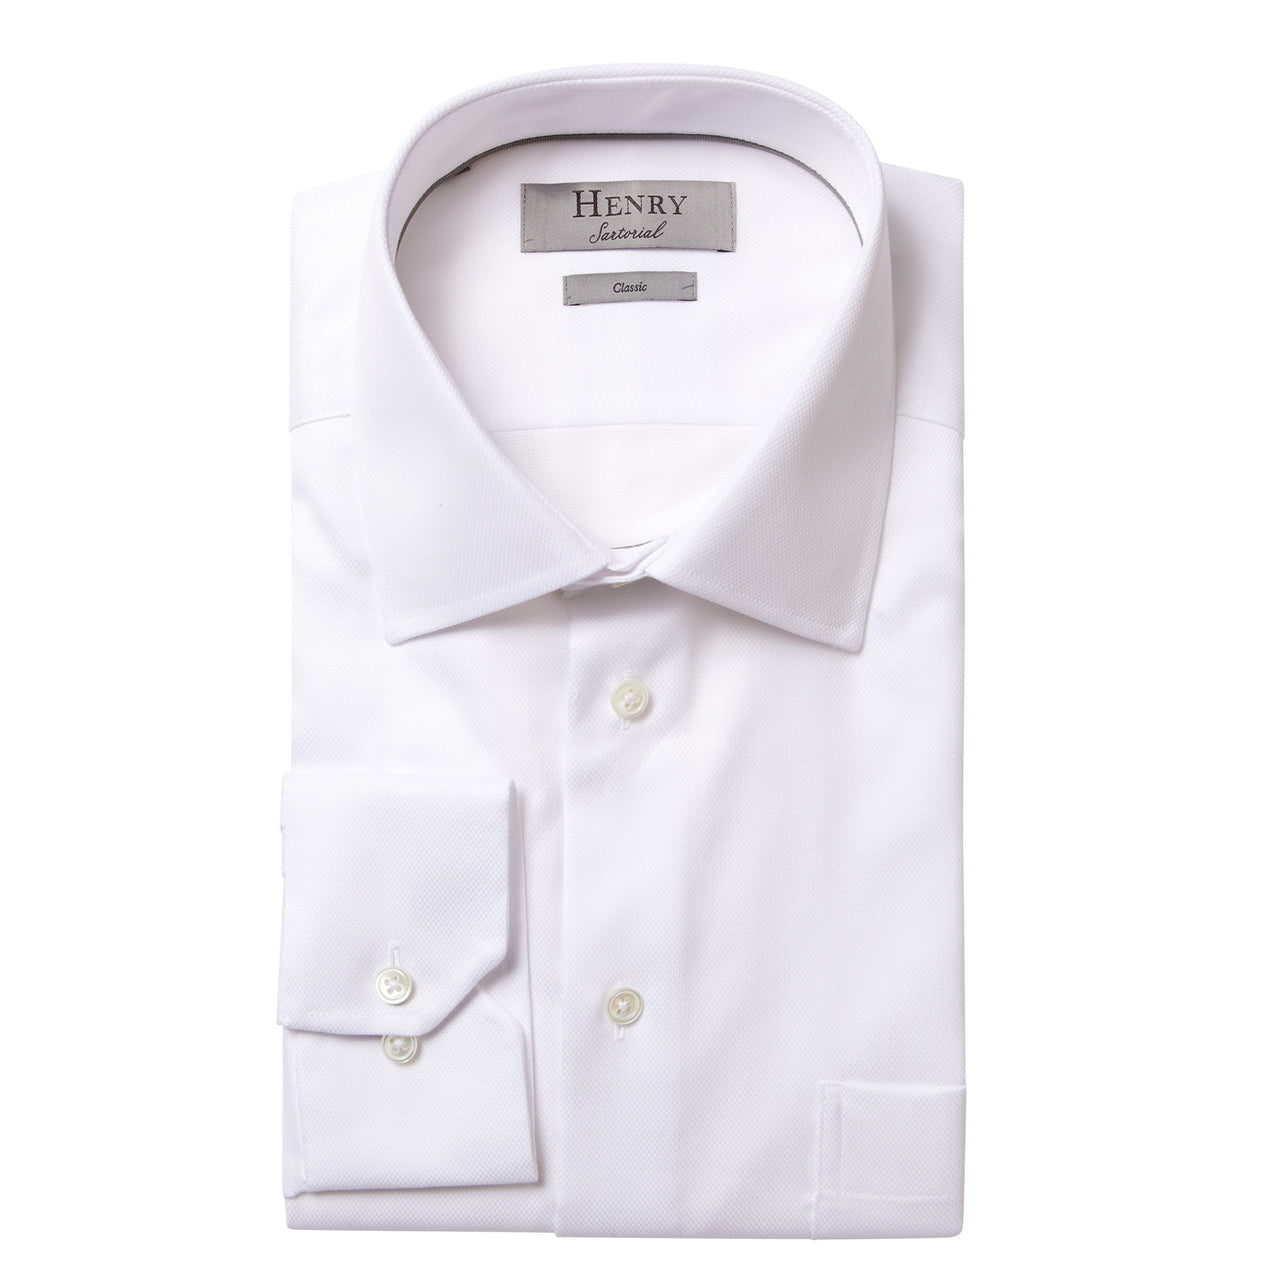 HENRY SARTORIAL Plain Business Shirt Single Cuff Classic Fit WHITE